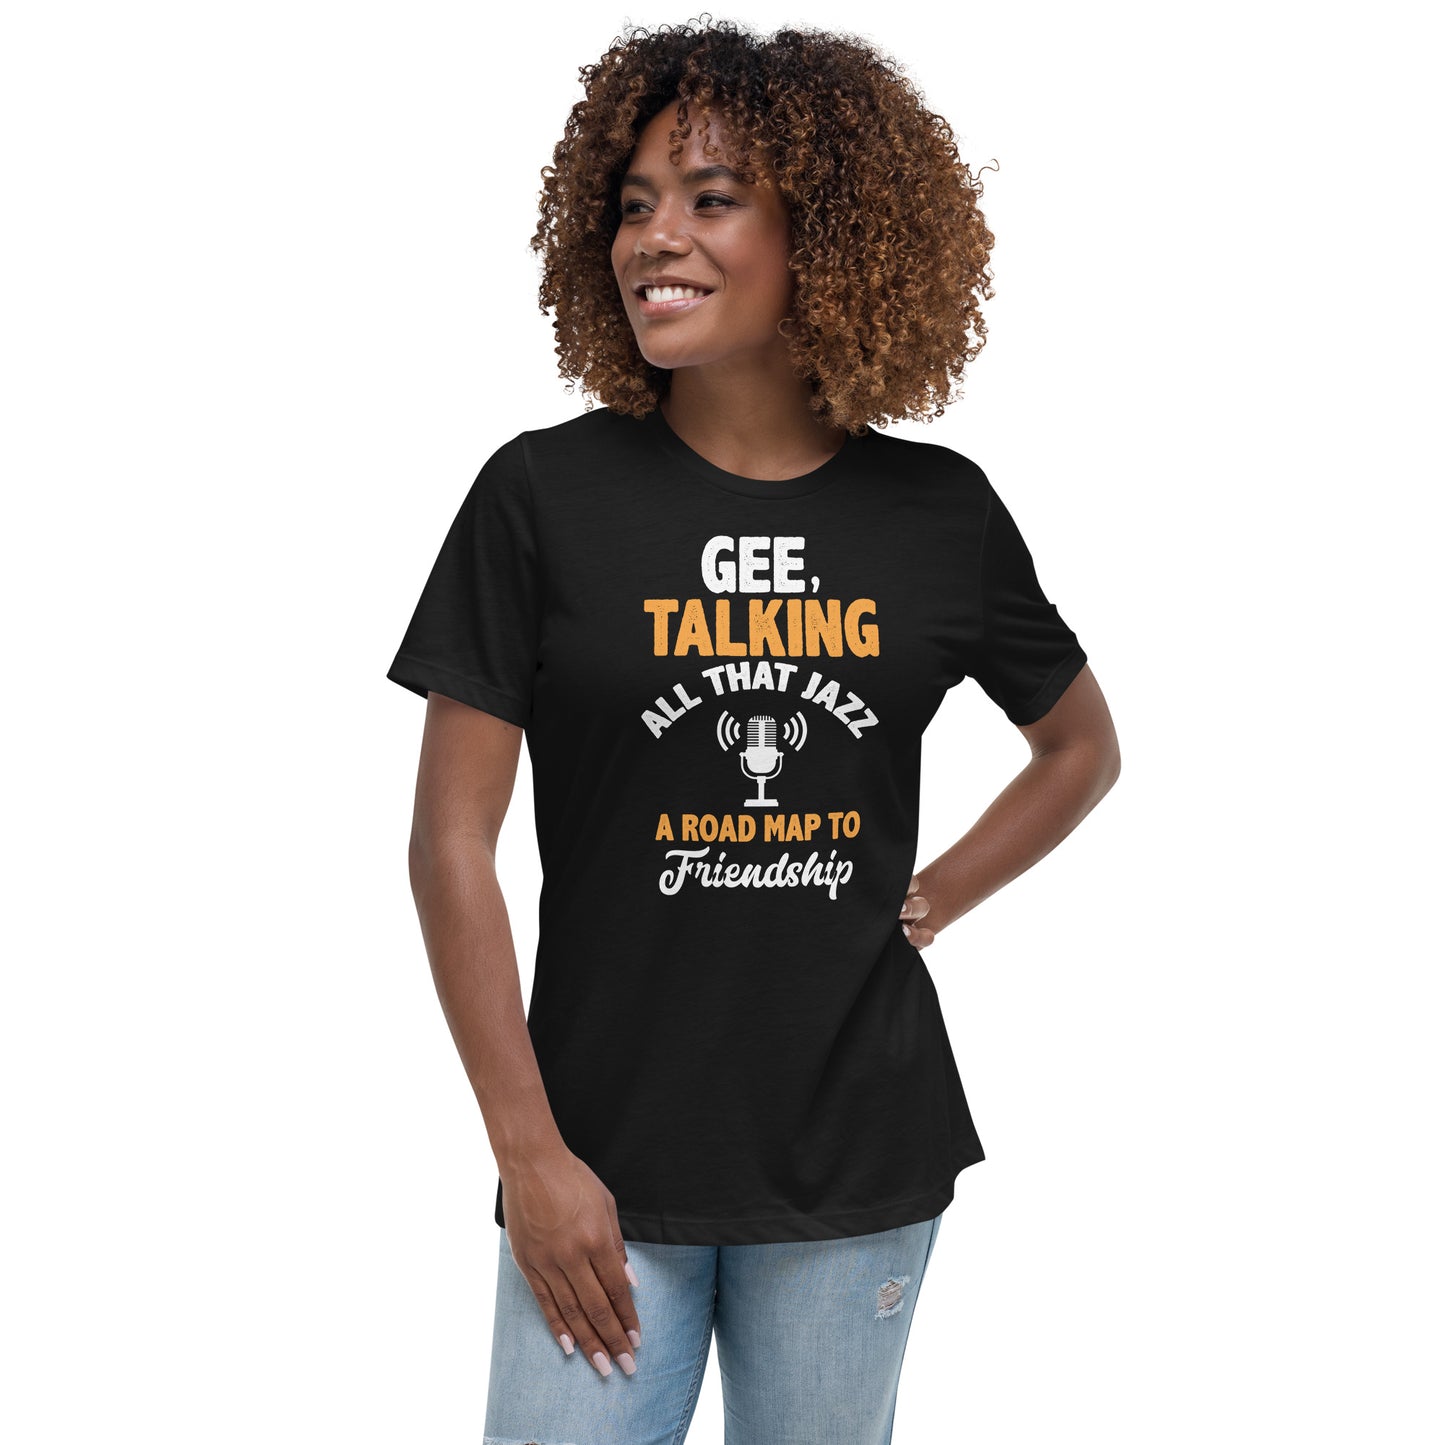 Gee Talking All That Jazz Women's Relaxed T-Shirt